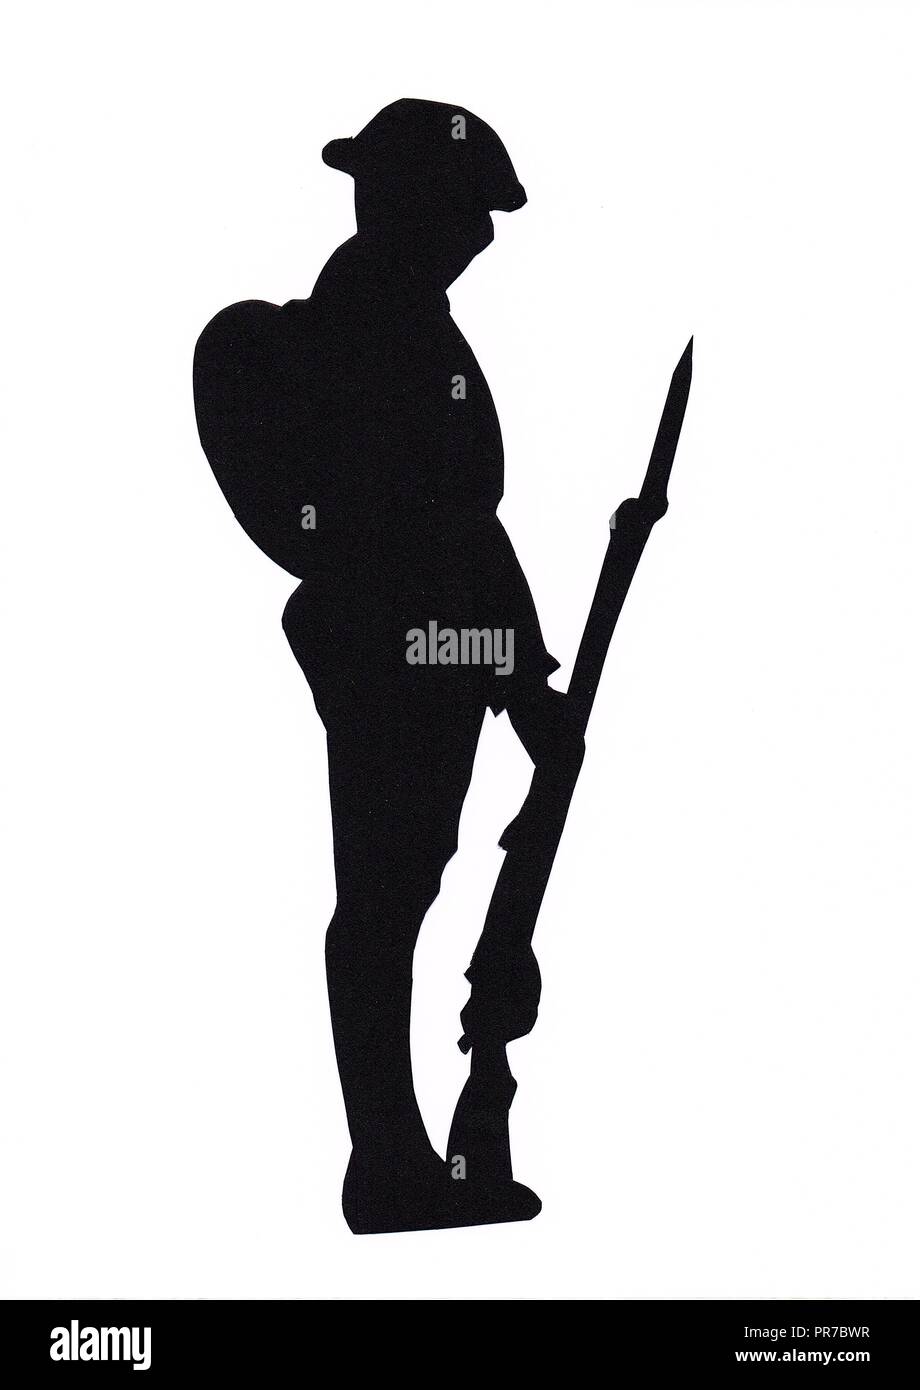 WW1, Soldier in Silhouette, British, Commonwealth, American GI, Tommy,   ANZAC, Great War, Remember, Ceremony, Armed Forces, Memorial, Army. Stock Photo